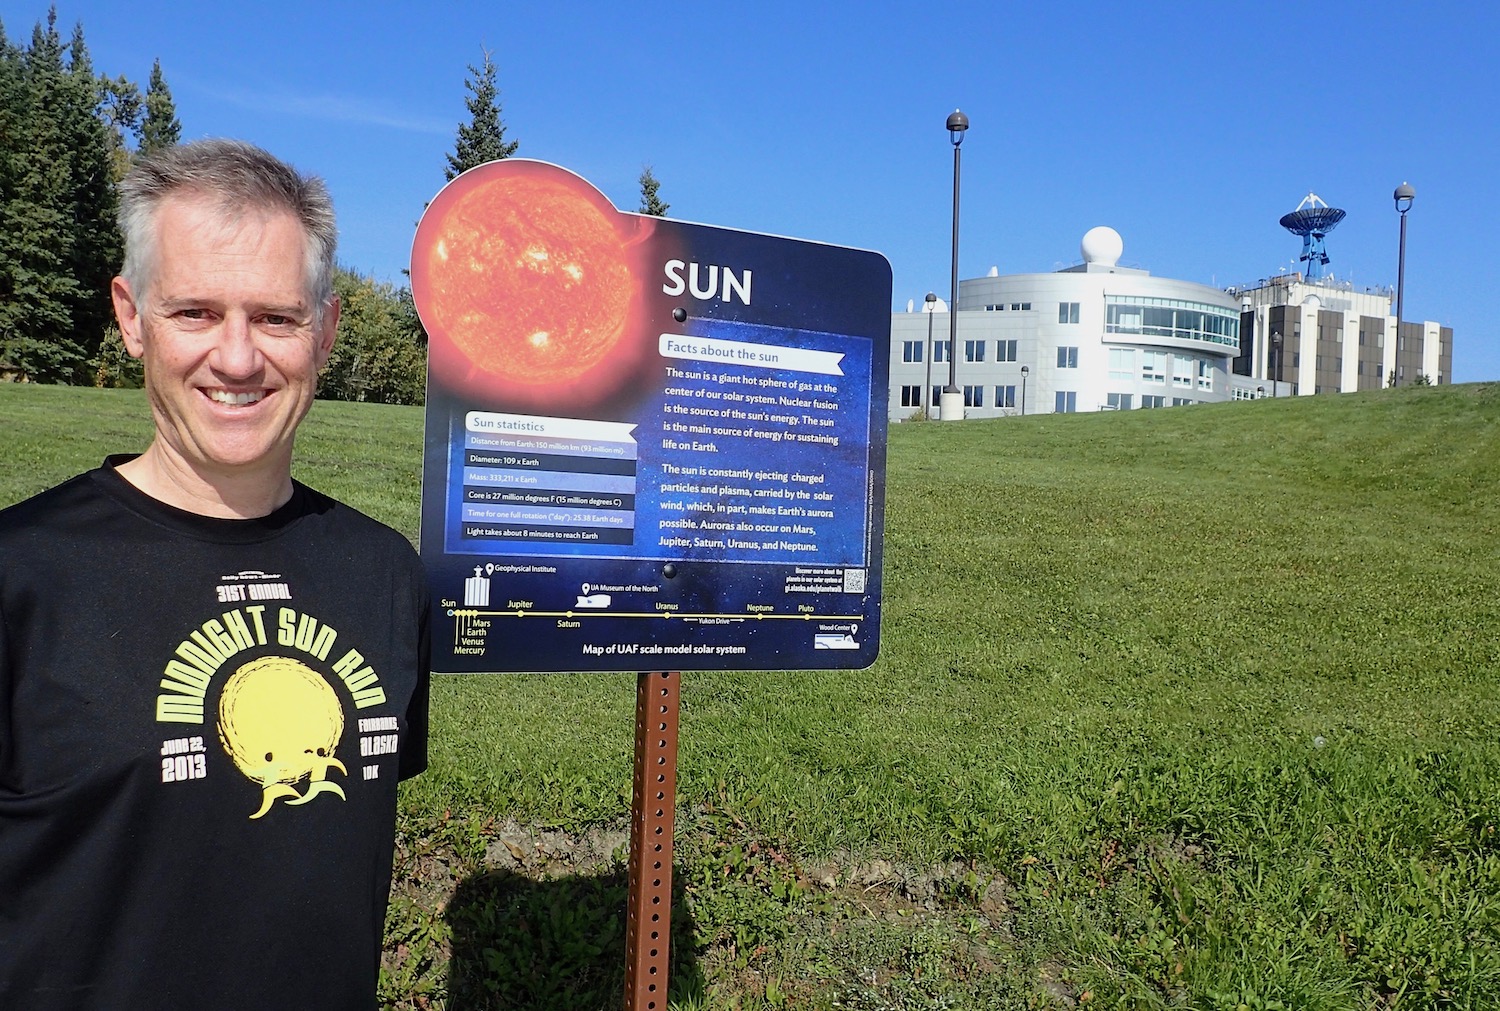 A man stands by a sign describing the sun. In the background is a green grassy field, a set of multistory buildings and blue sky.